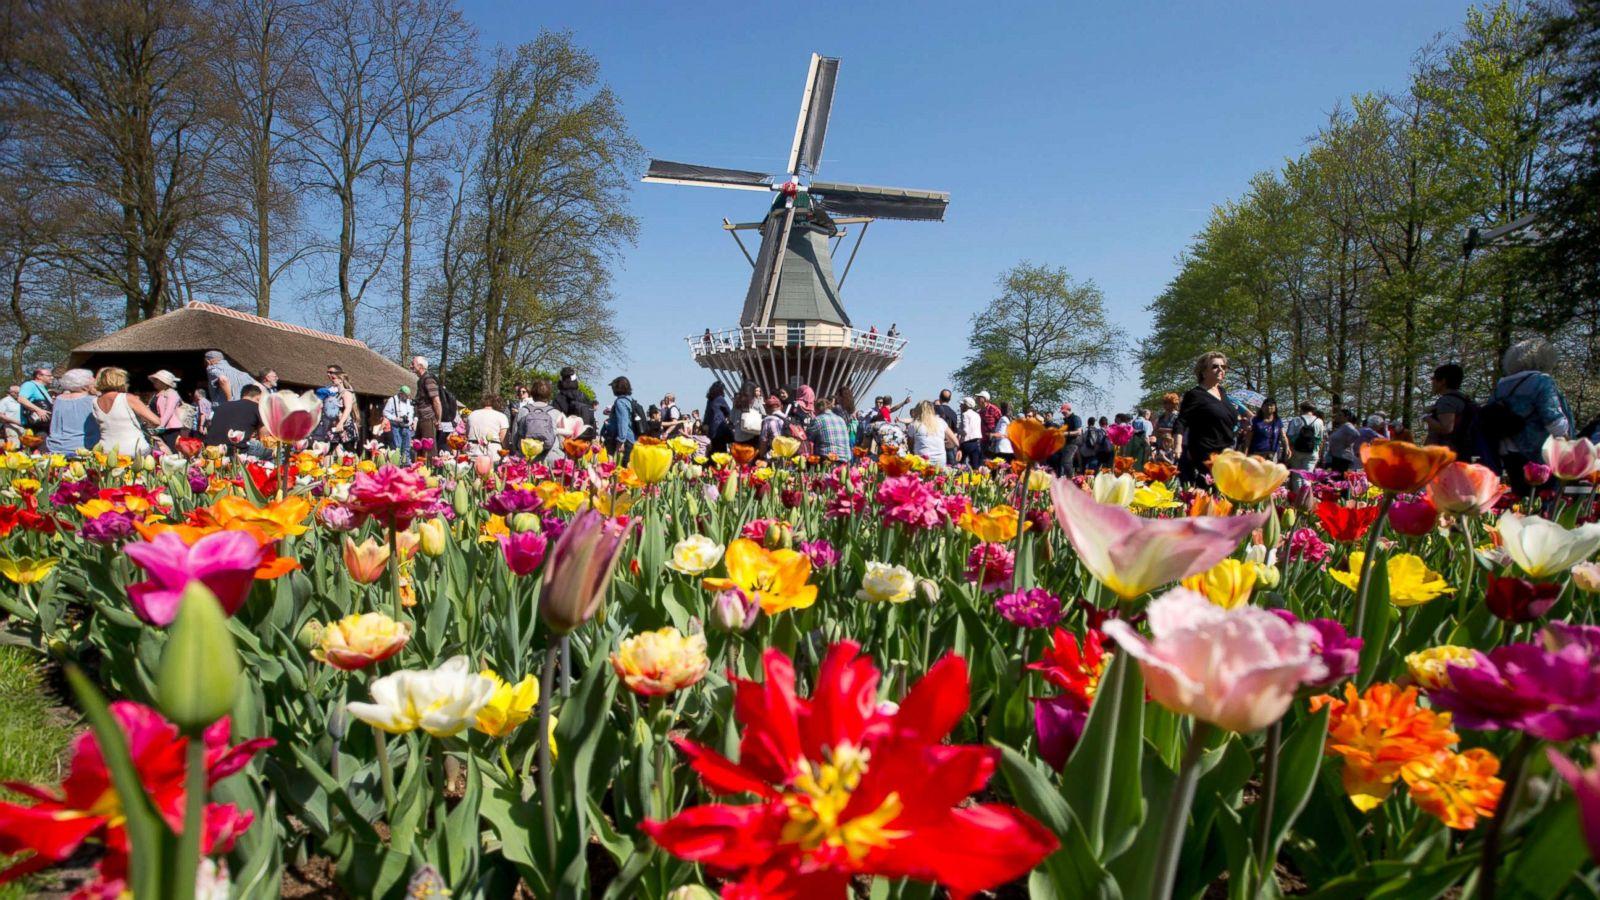 The 'Garden of Europe' is in full bloom in The Netherlands